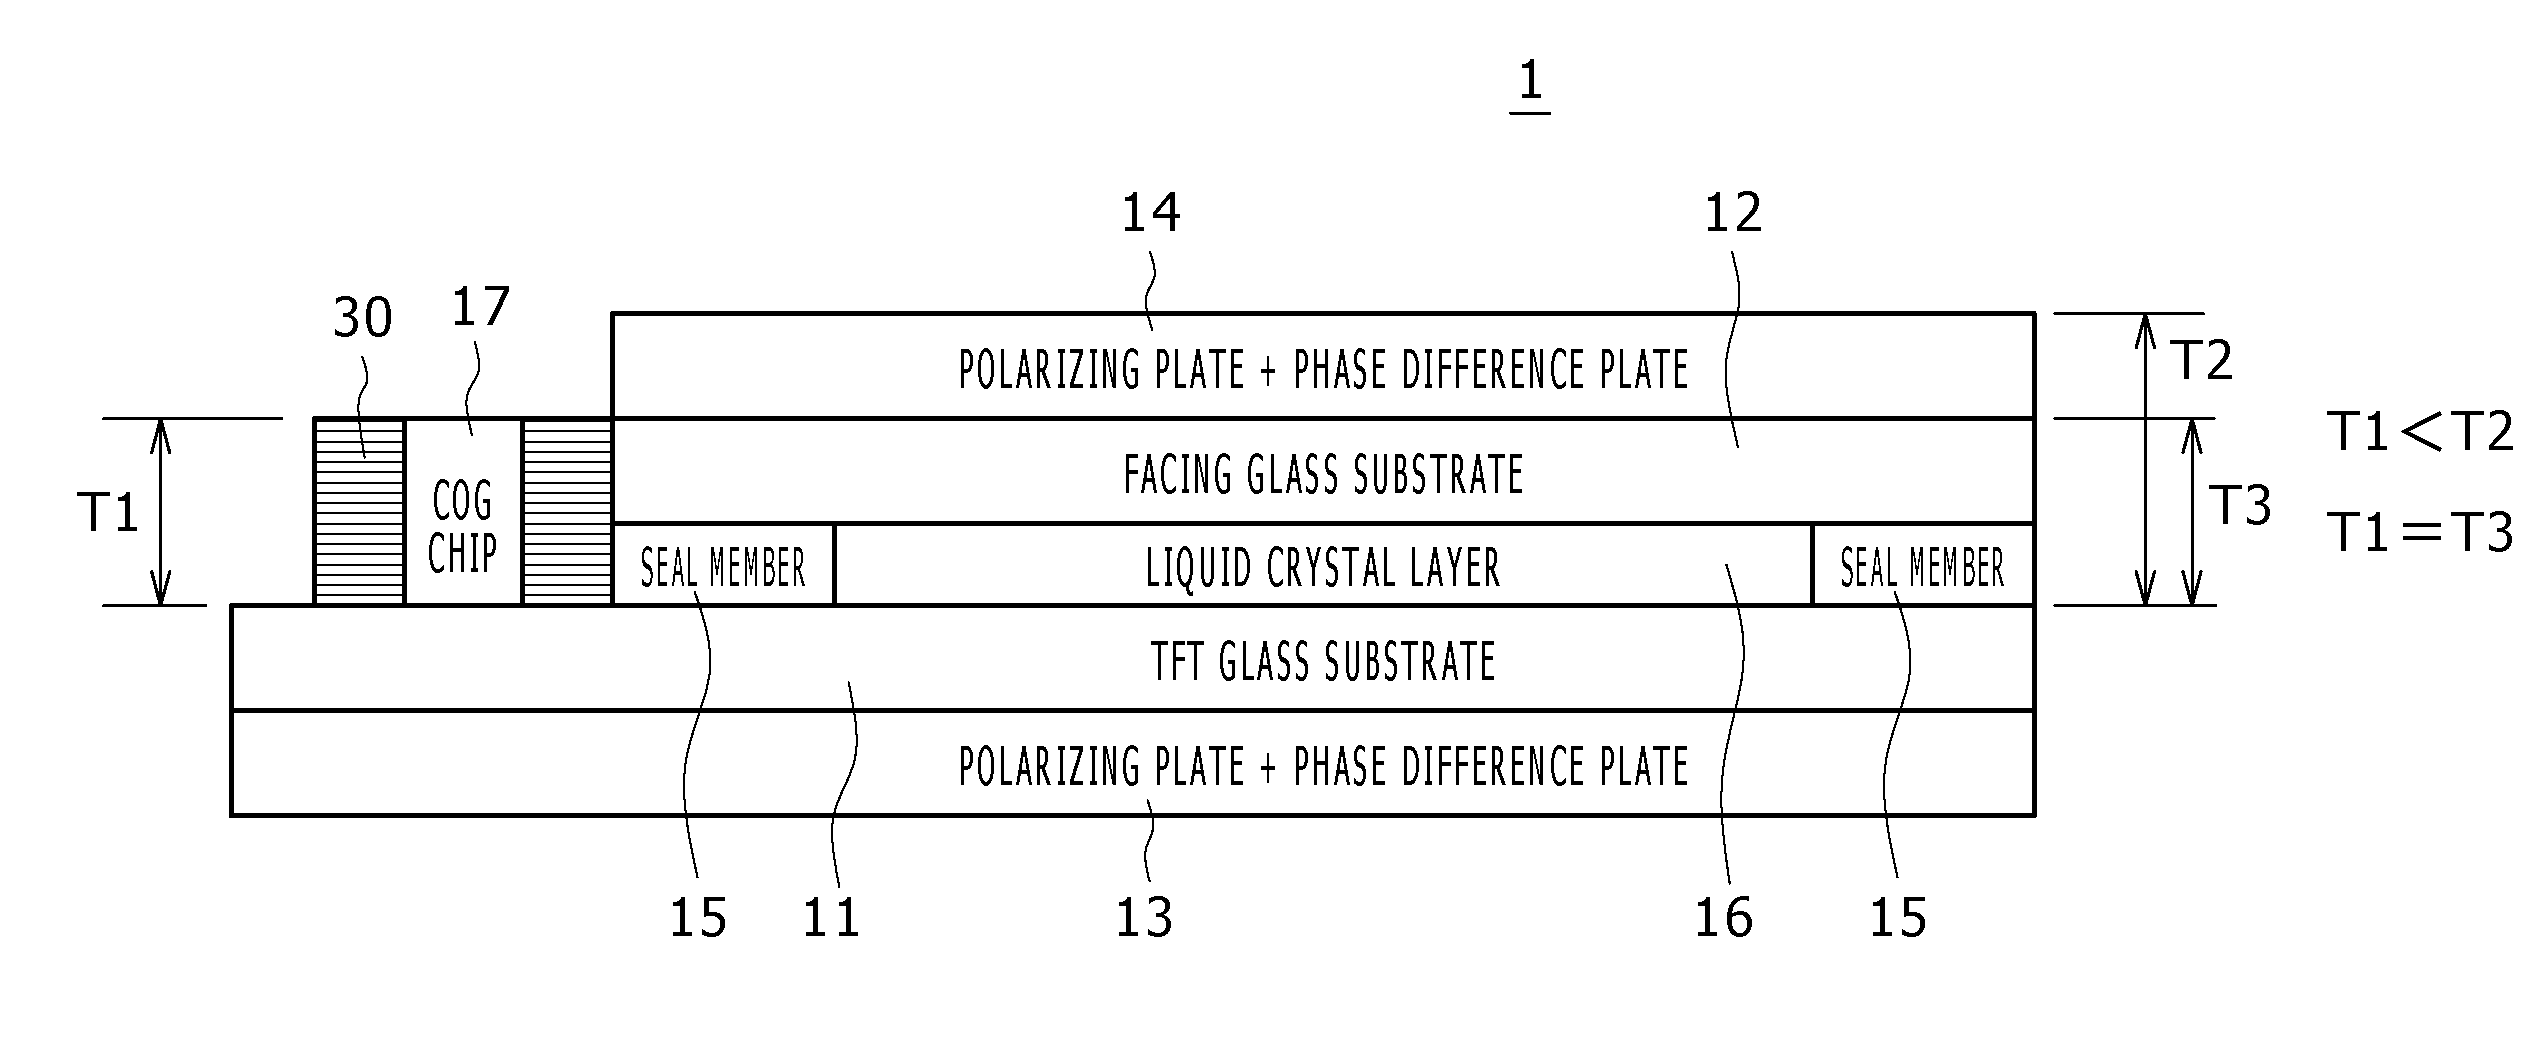 Display device comprising a protective fixing member disposed only about a periphery of a semiconductor chip wherein a top side and a bottom side are co-planar with a respective top side and a bottom side of the semiconductor chip